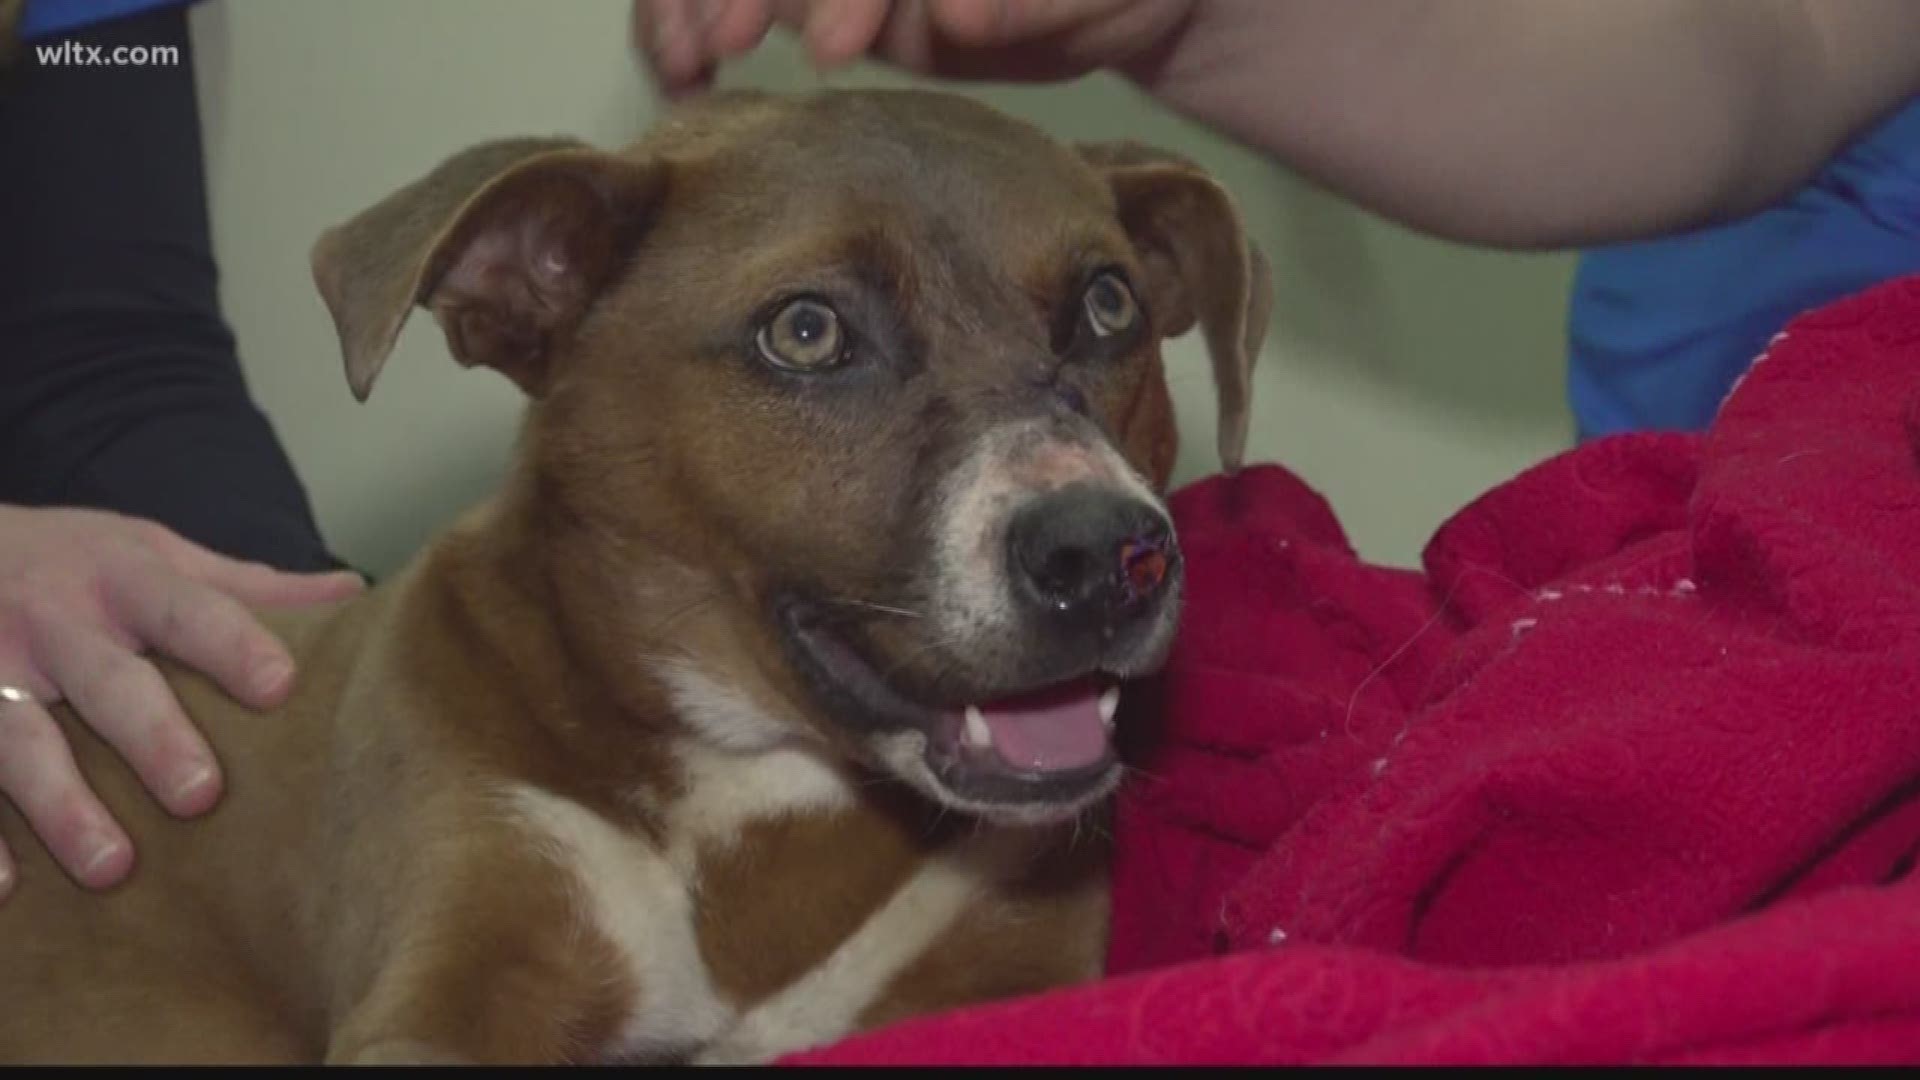 A Calhoun County woman came home Tuesday to find her puppy with an arrow through her head.